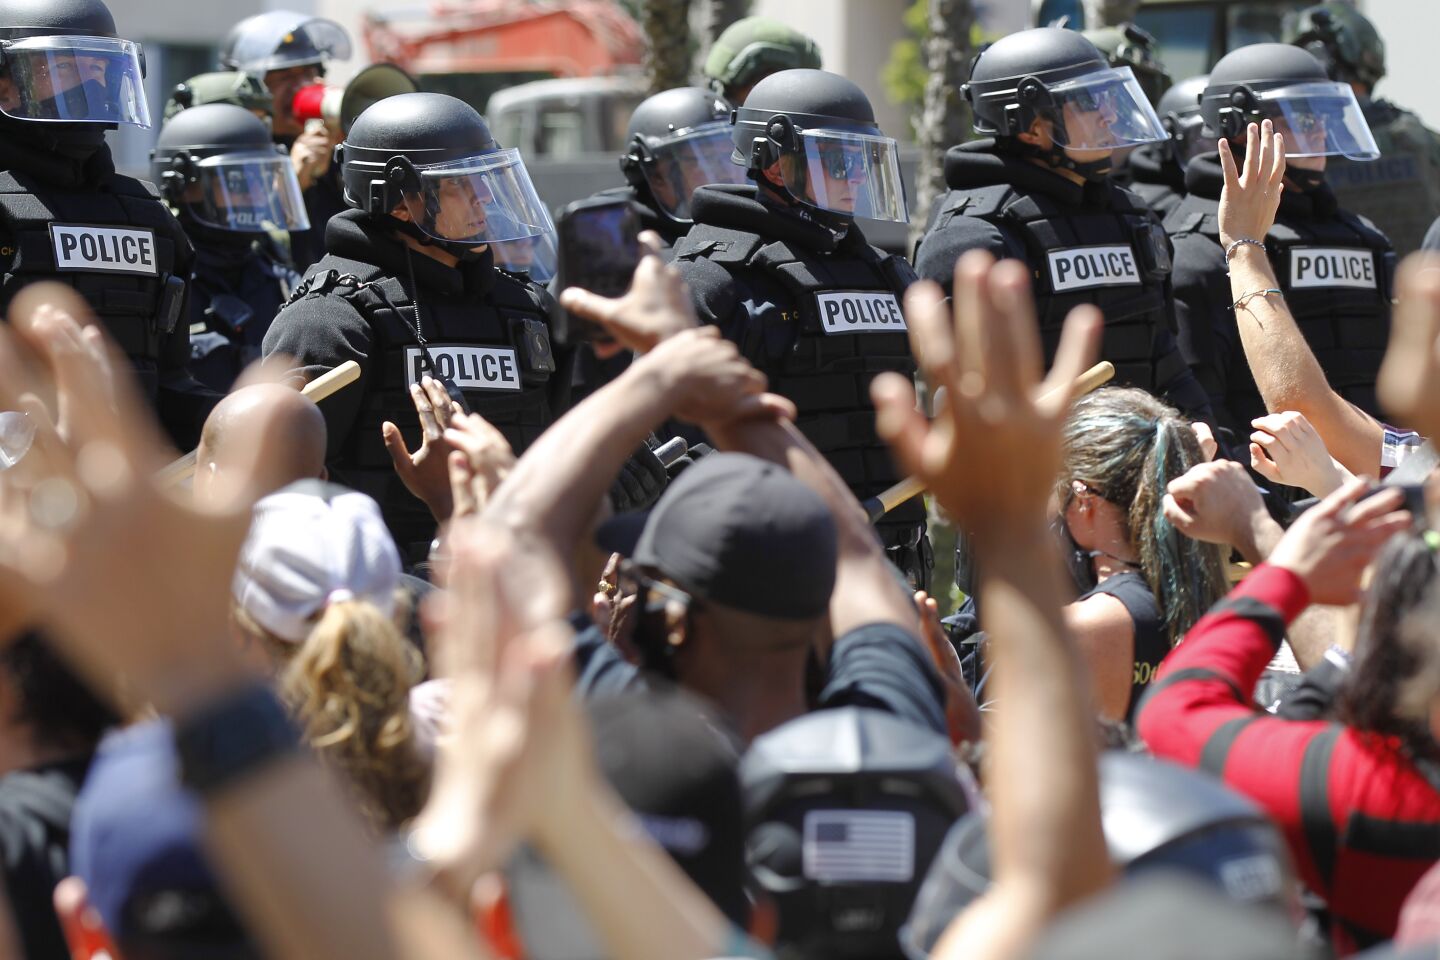 San Diego police in riot gear lined Broadway in downtown San Diego, stopping a group of protesters on May 31, 2020. The group was protesting the death of George Floyd.